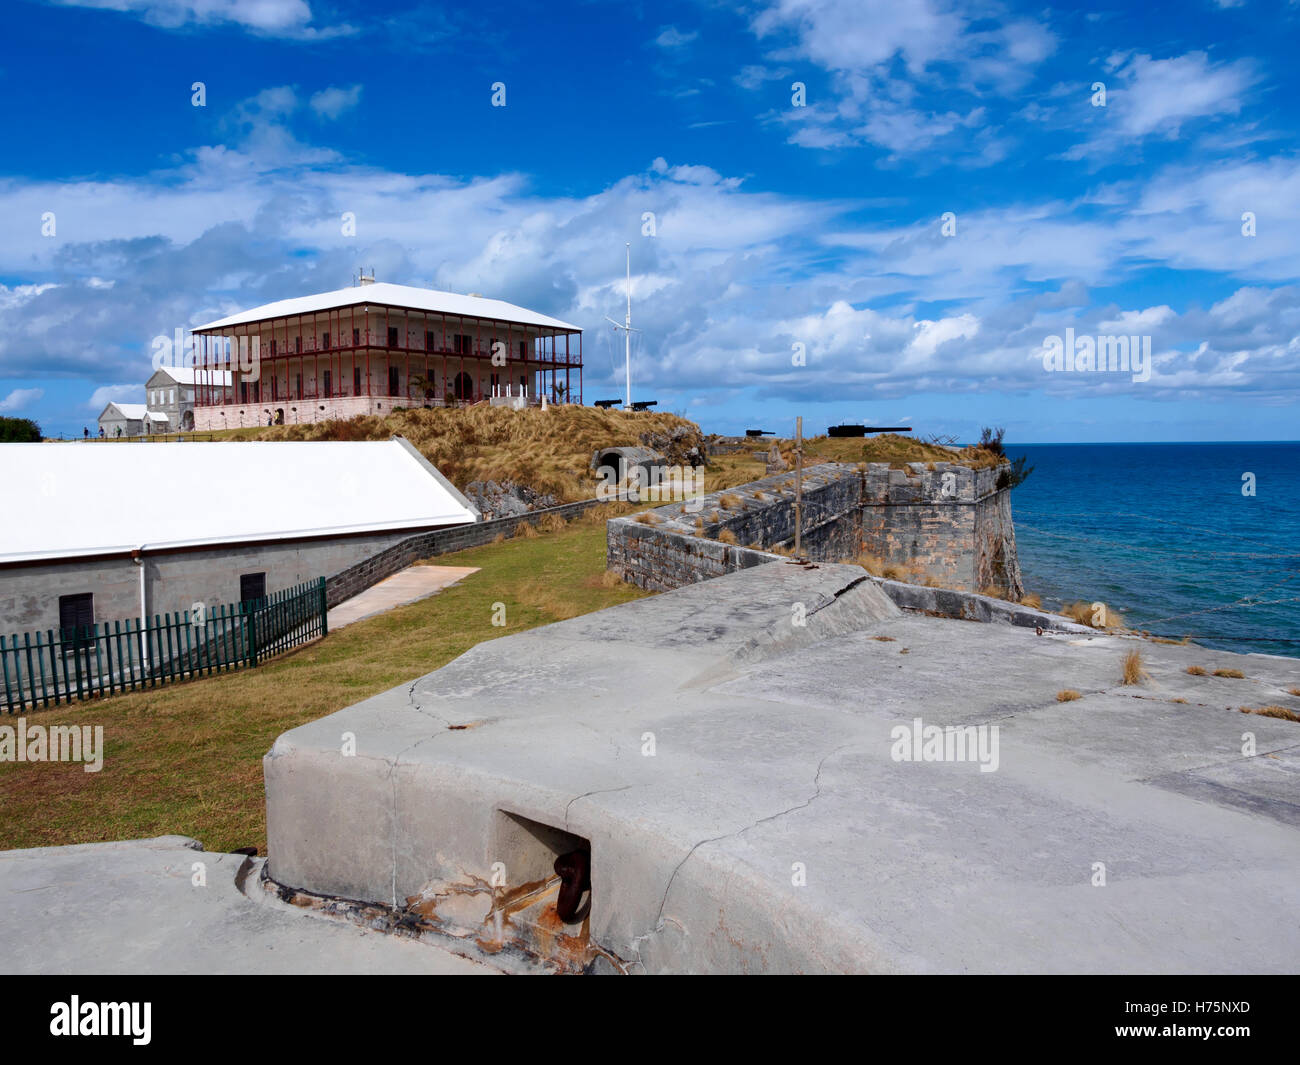 Commissioner's House and The Keep, Royal Navy Dockyard, Bermuda Stock Photo